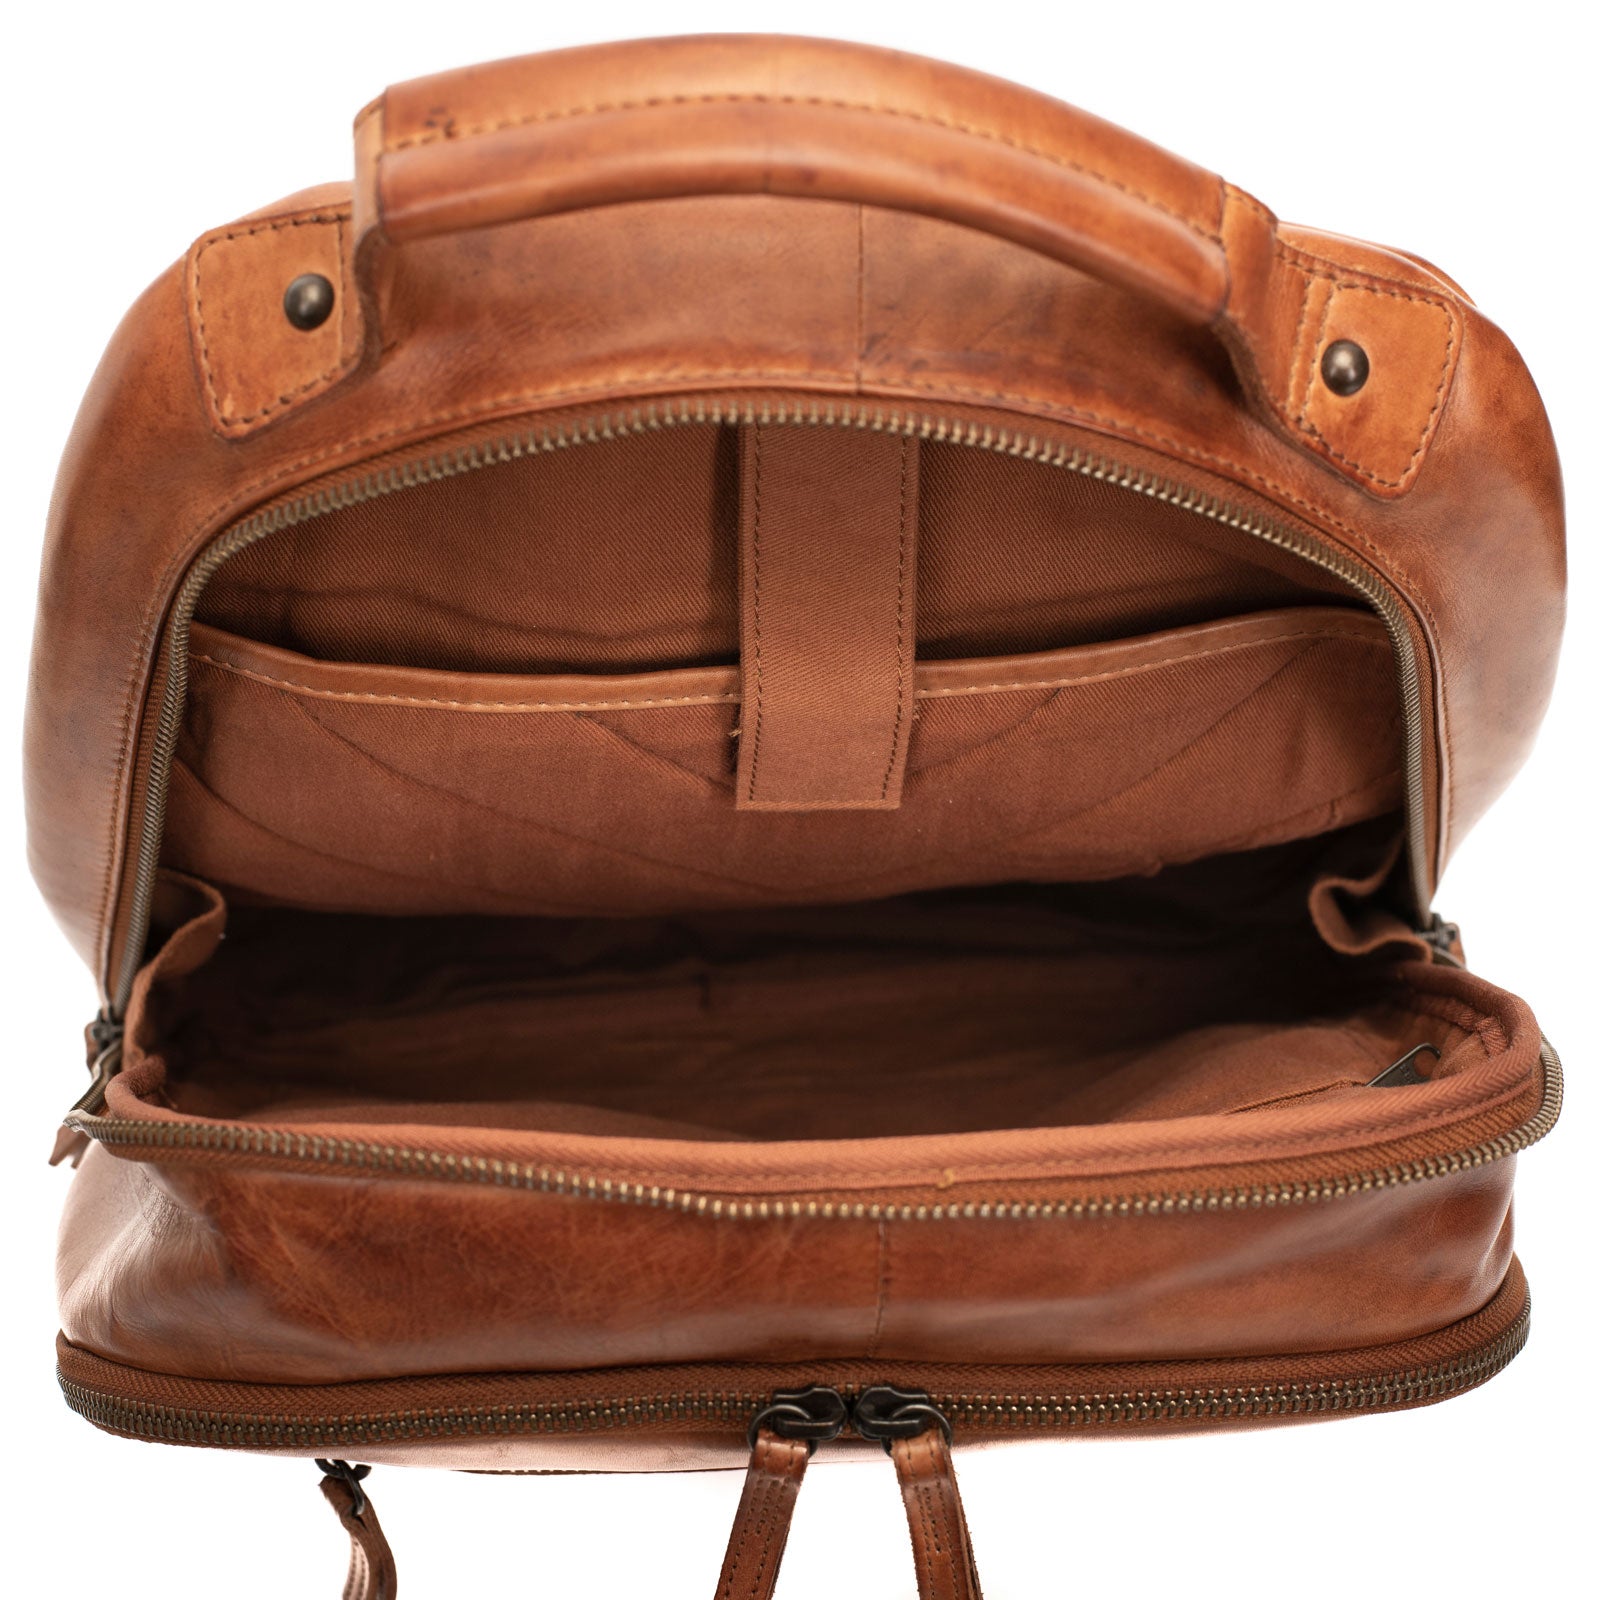 Gianni Conti 'Frey' Leather Backpack – Original & Timeless